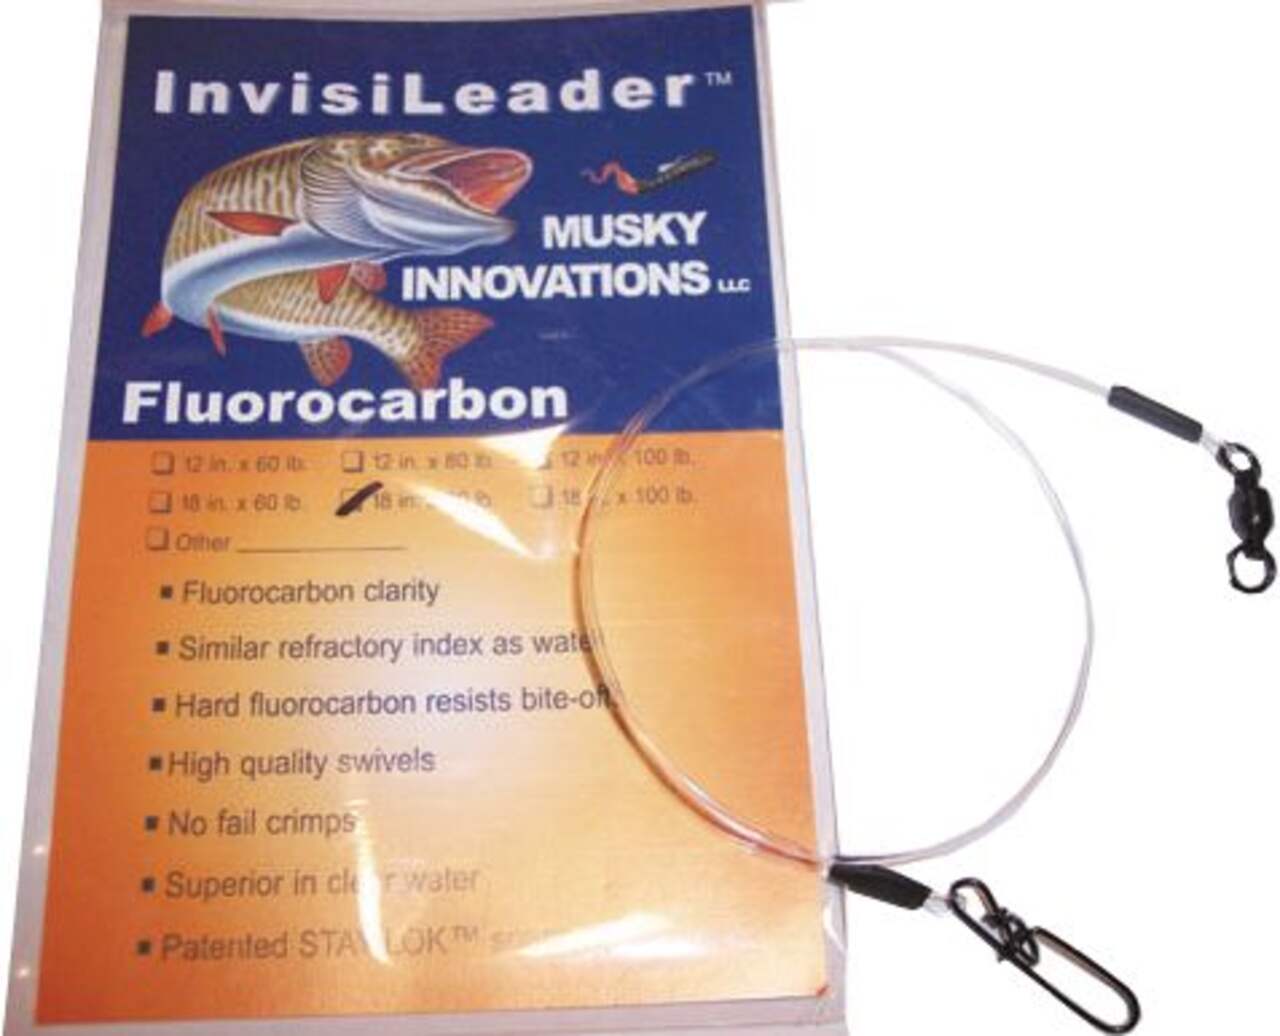 Musky Innovations Fluorocarbon Invisi-Leaders™ Fishing Leader, 12-in x 80-lb